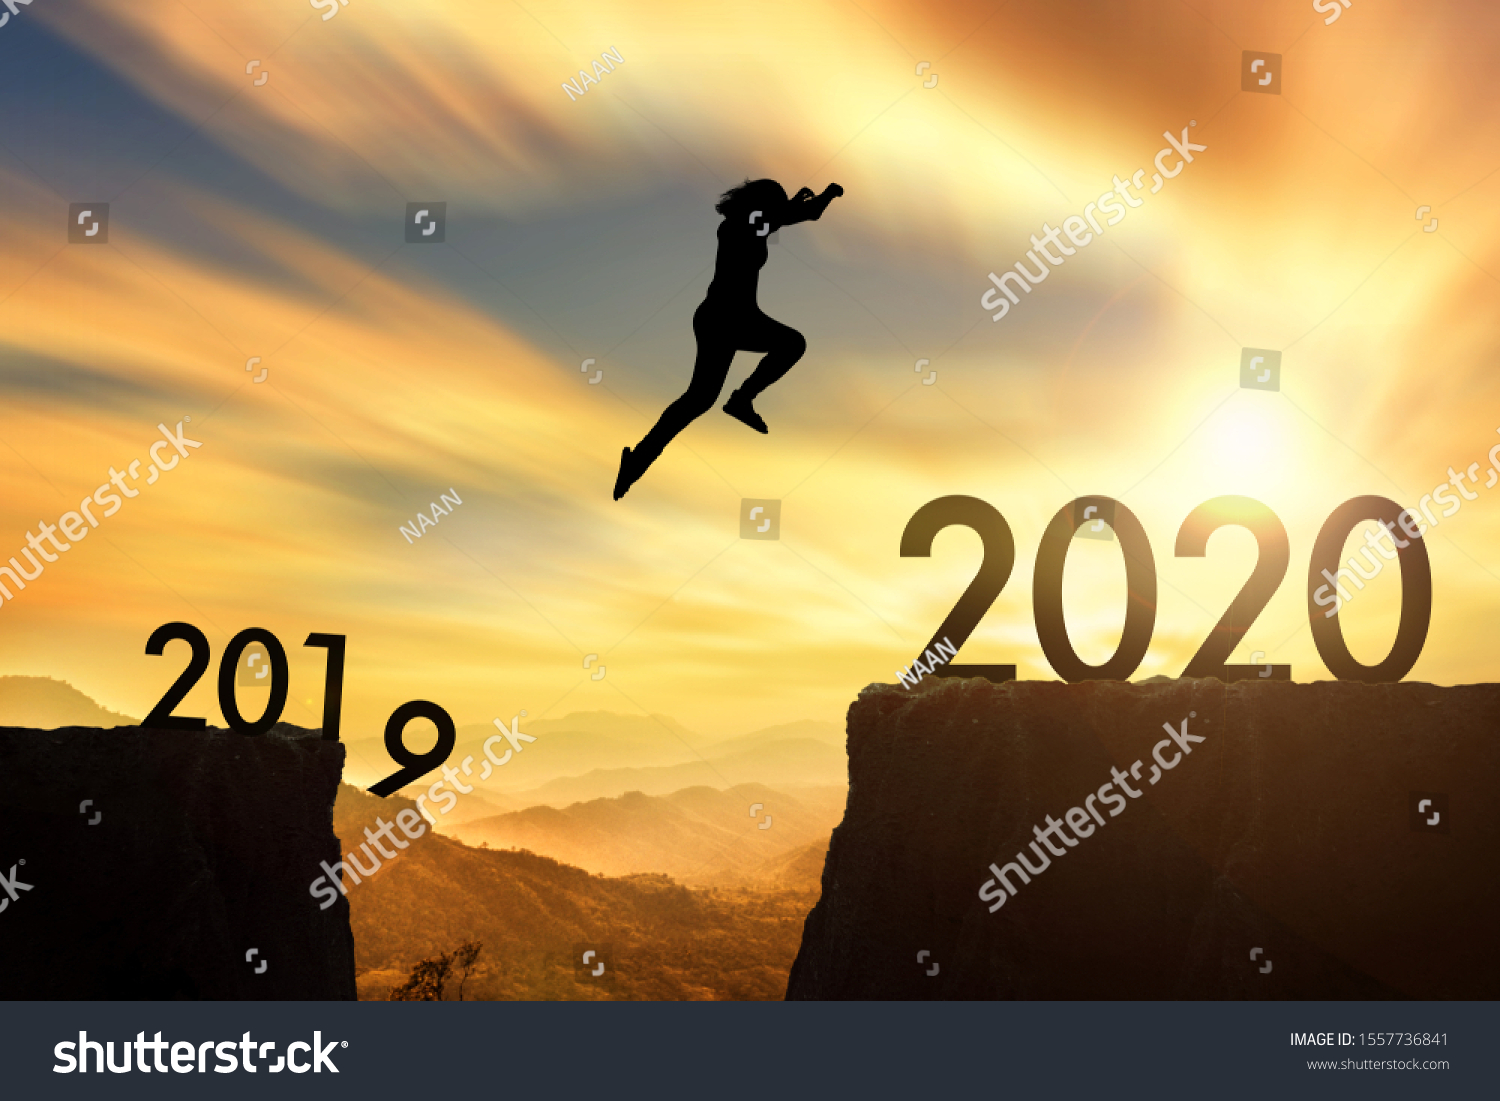 The woman jumping from 2019 cliff to 2020 cliff on sunrise time #1557736841